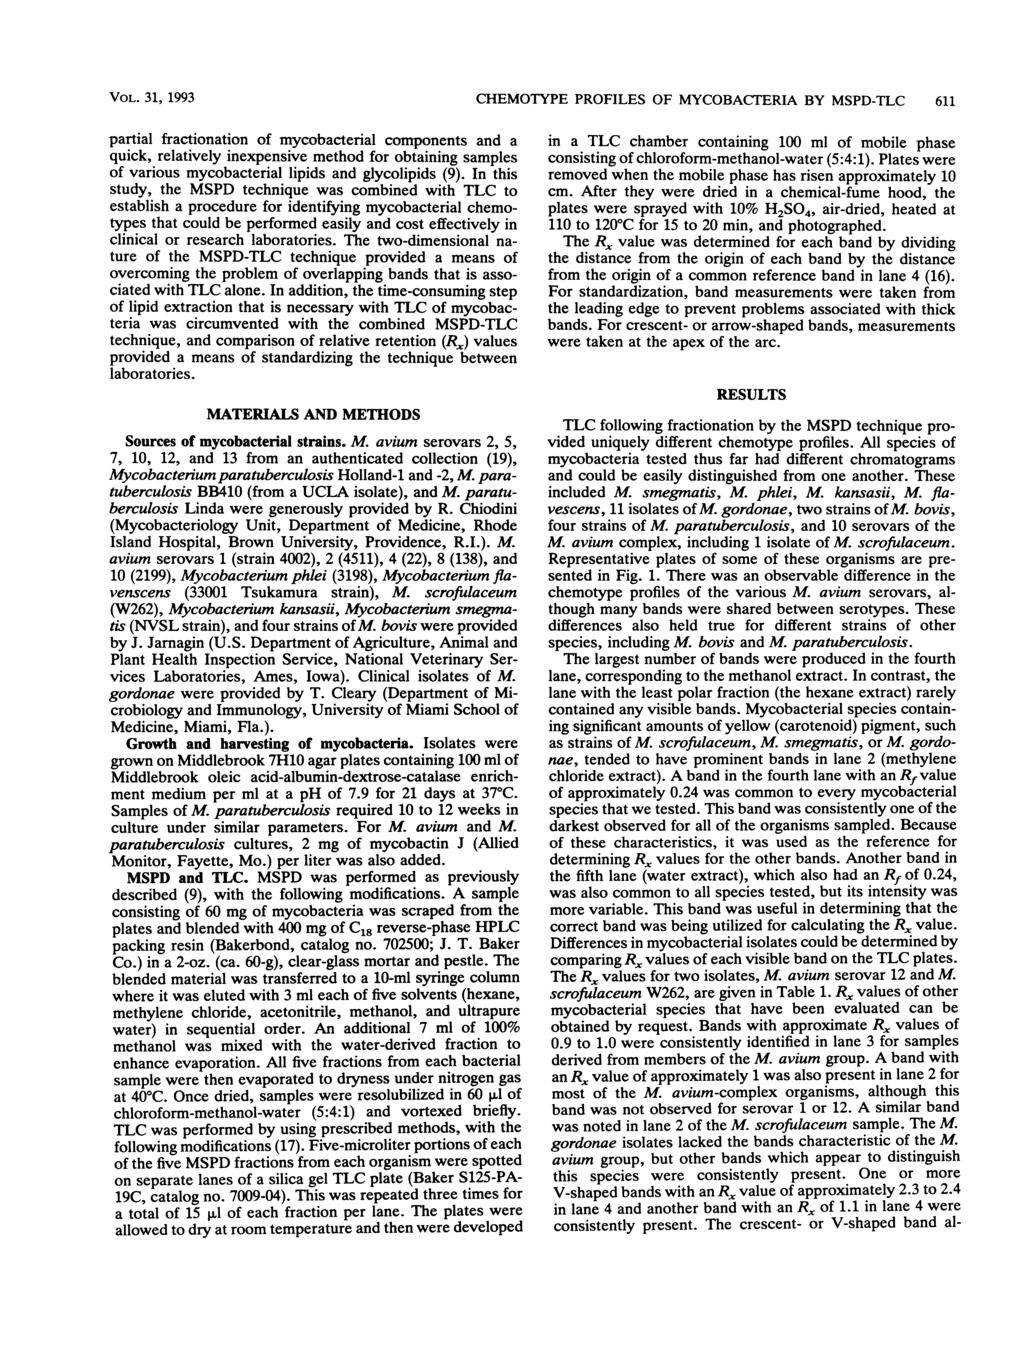 VOL. 31, 1993 CHEMOTYPE PROFILES OF MYCOBACTERIA BY MSPD-TLC 611 partial fractionation of mzycobacterial components and a quick, relatively inexpensive method for obtaining samples of various